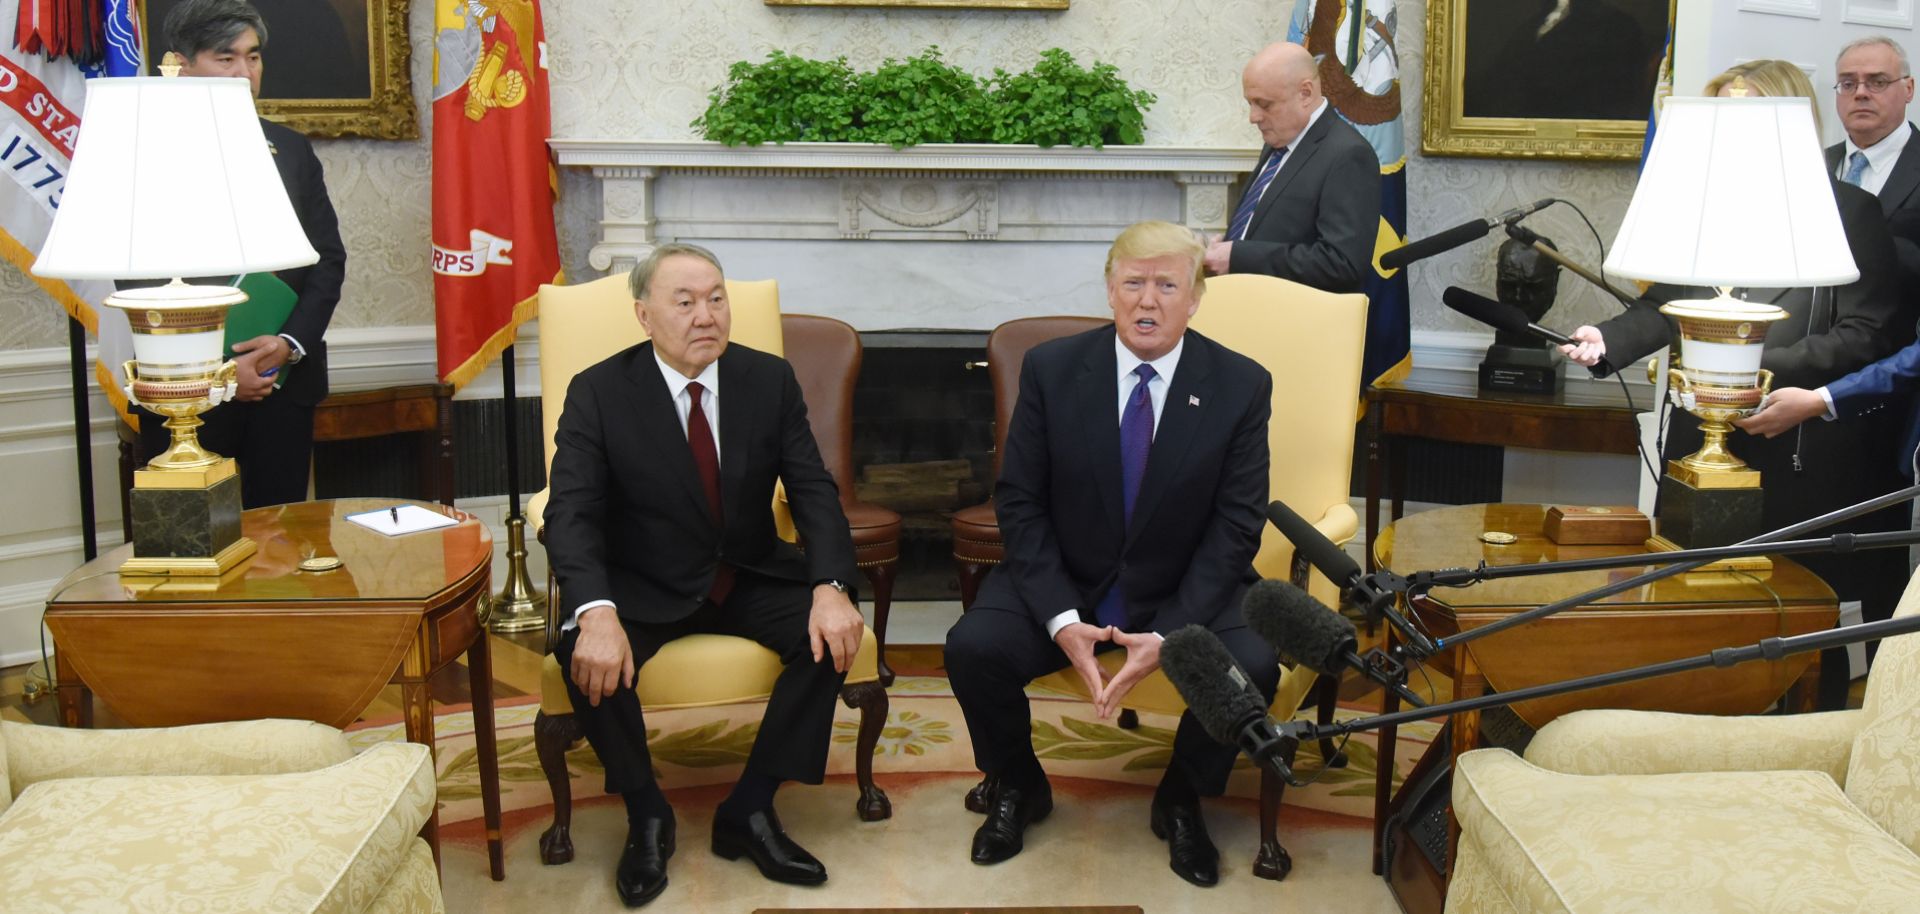 Kazakh President Nursultan Nazarbayev (left) meets with U.S. President Donald Trump during a visit to the White House on Jan. 16.